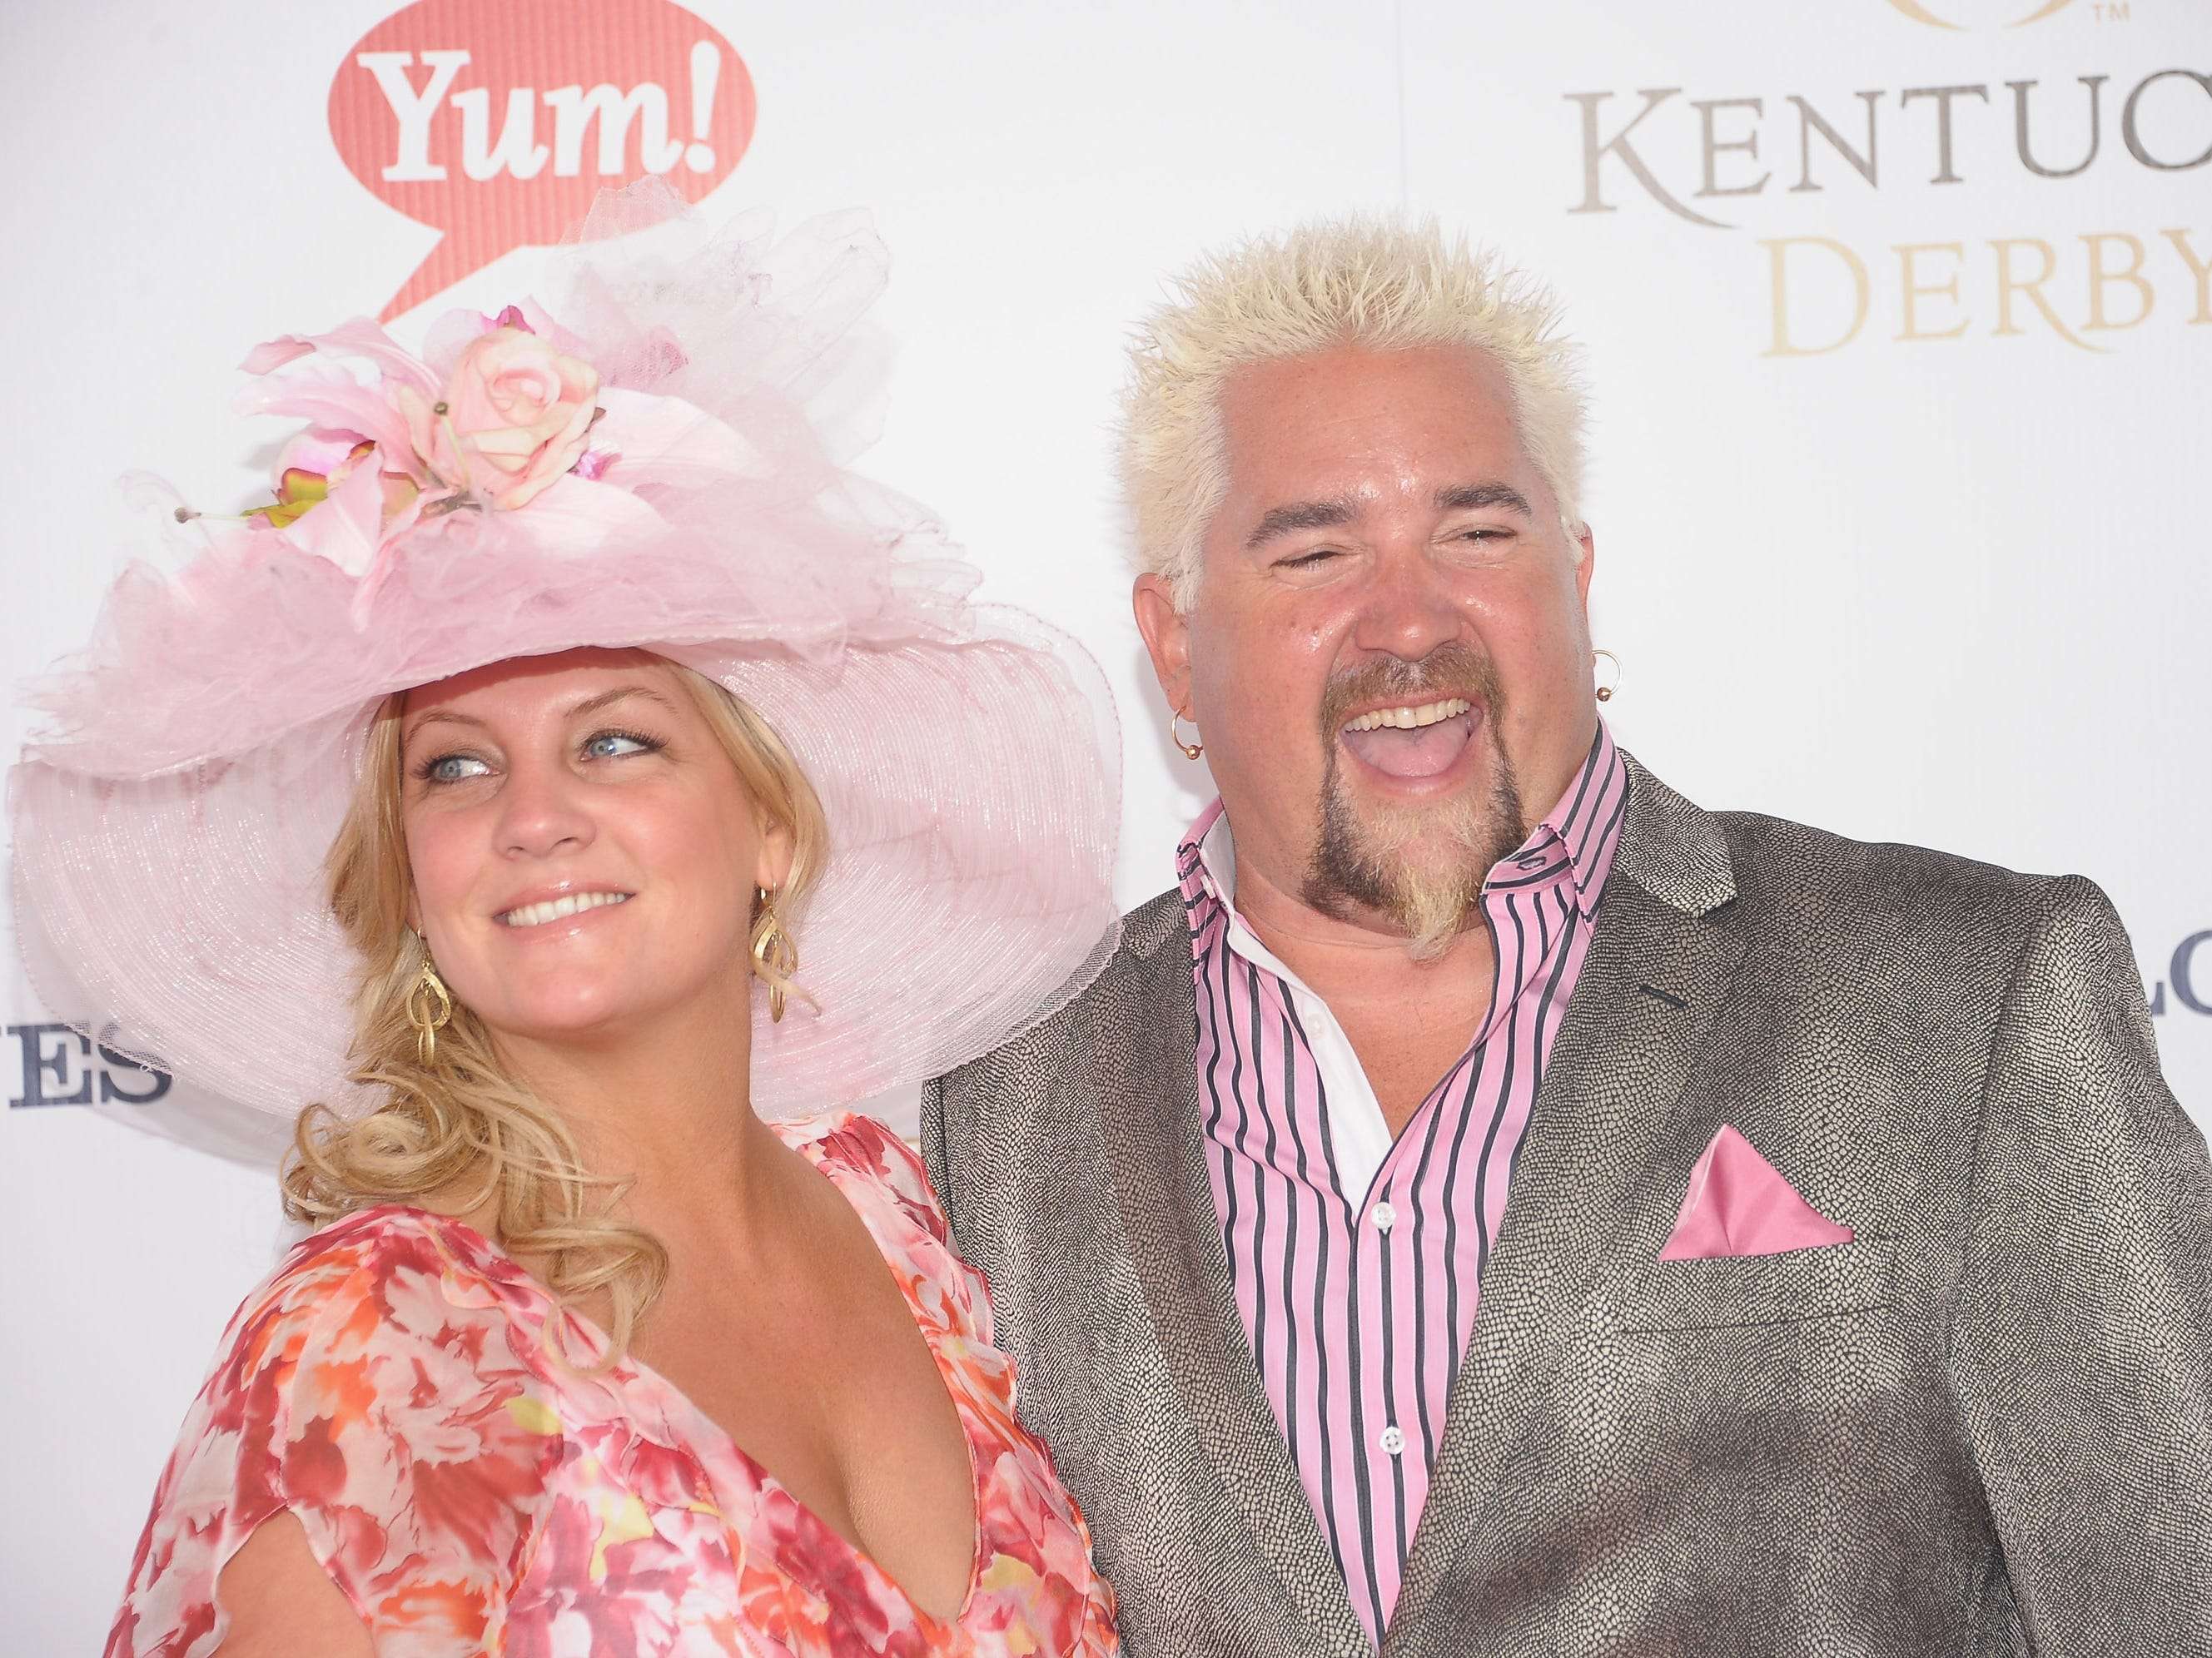 Guy and Lori Fieri have been married for over 25 years photo pic pic